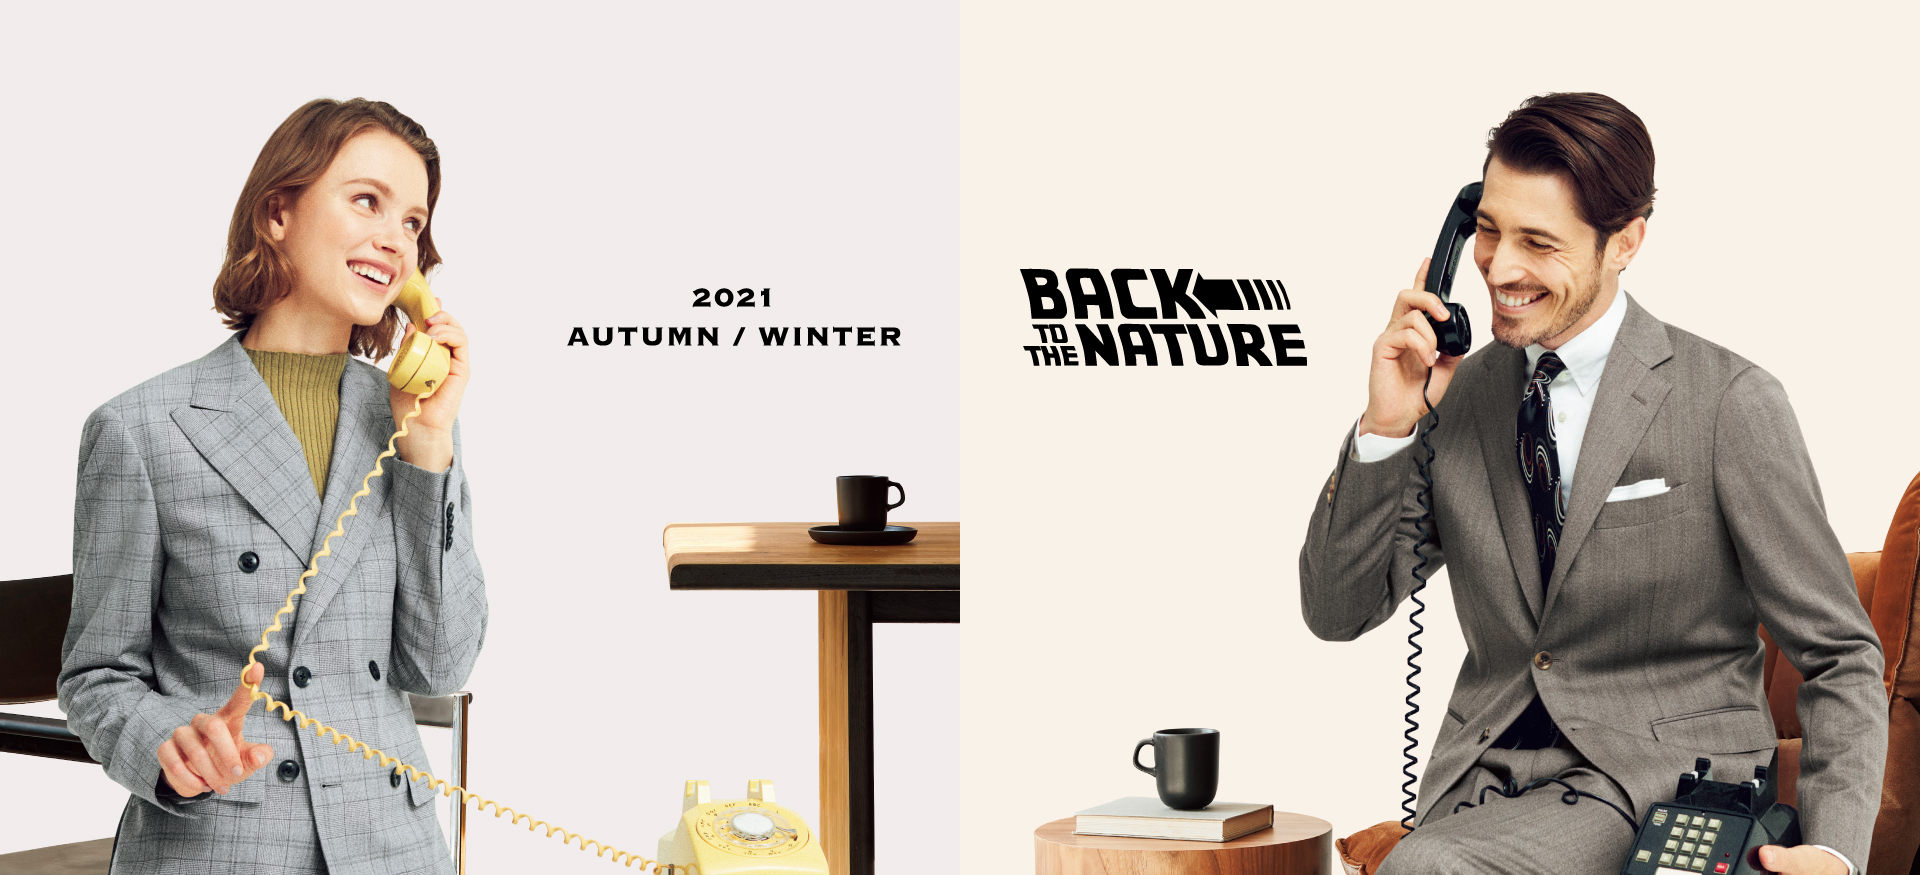 2021 AUTUMN/WINTER BACK TO THE NATURE